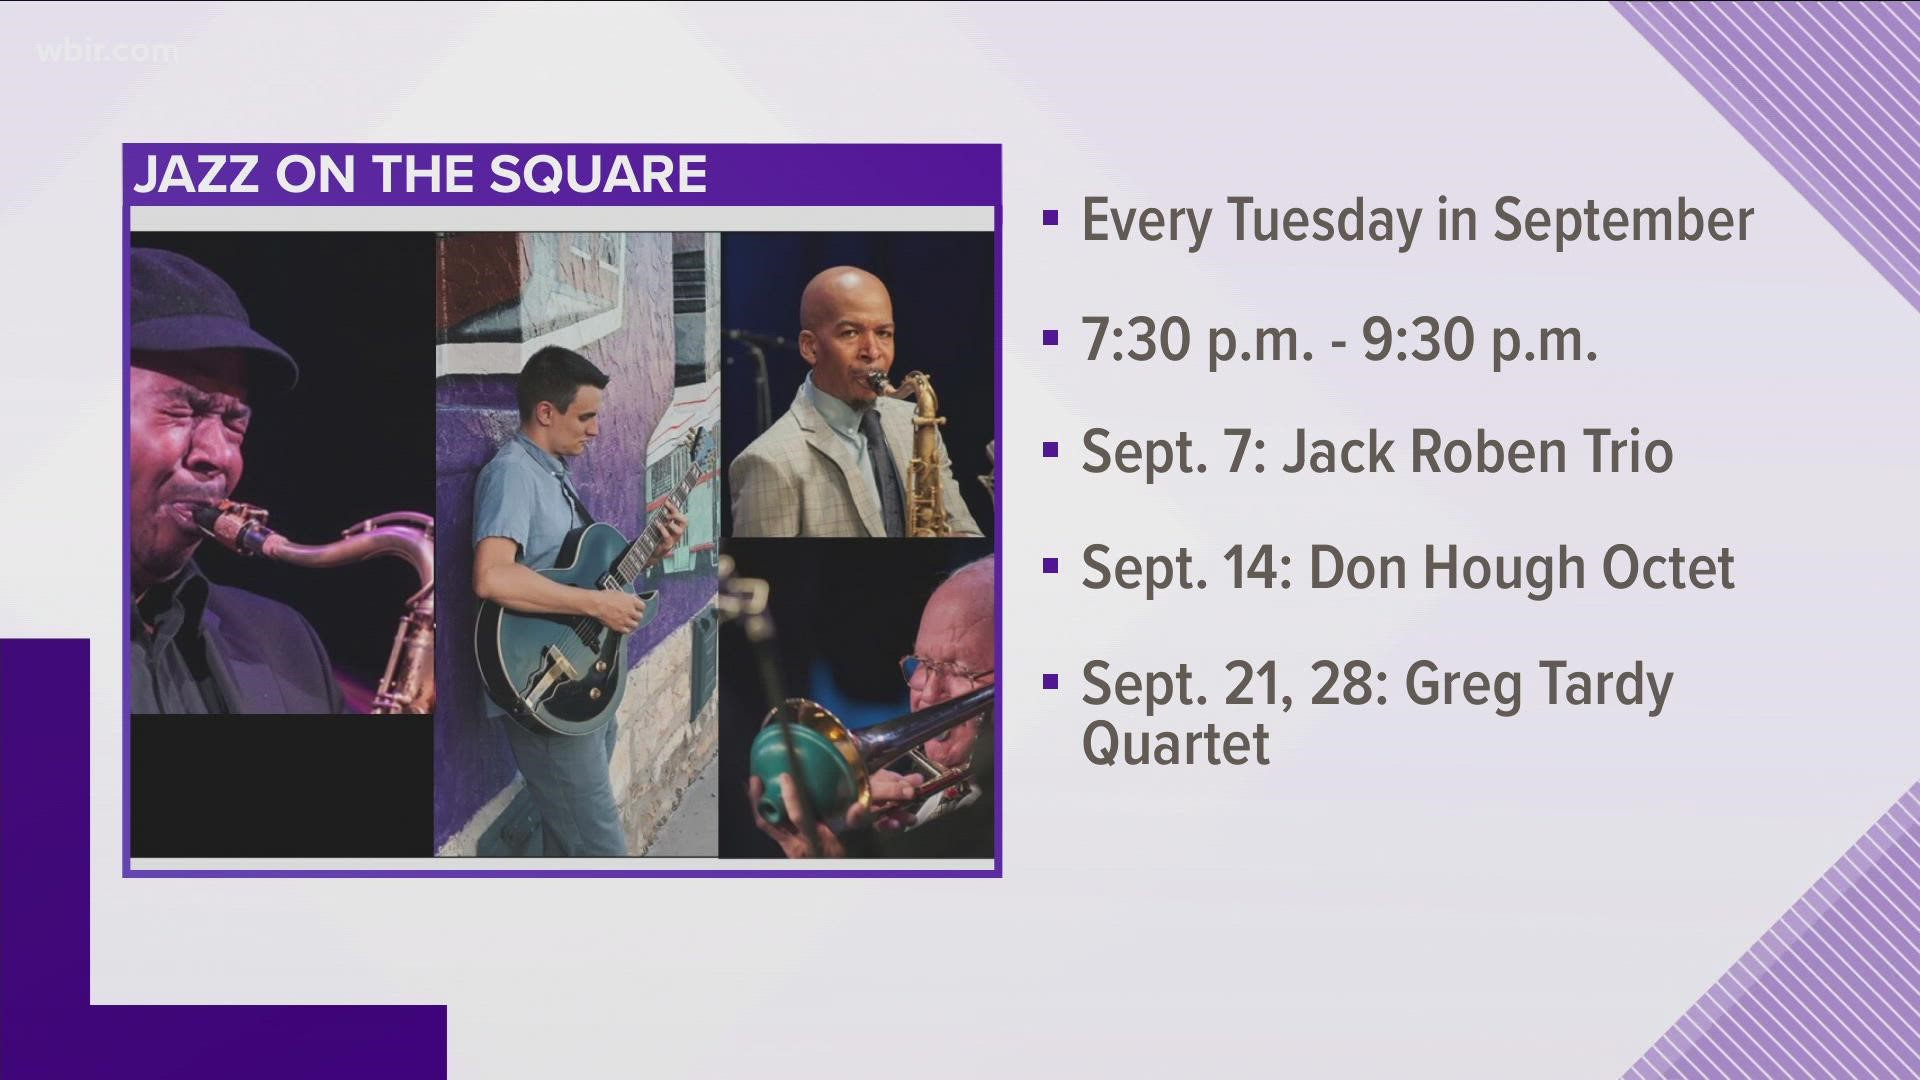 Catch a free jazz concert in Market Square every Tuesday night in September.